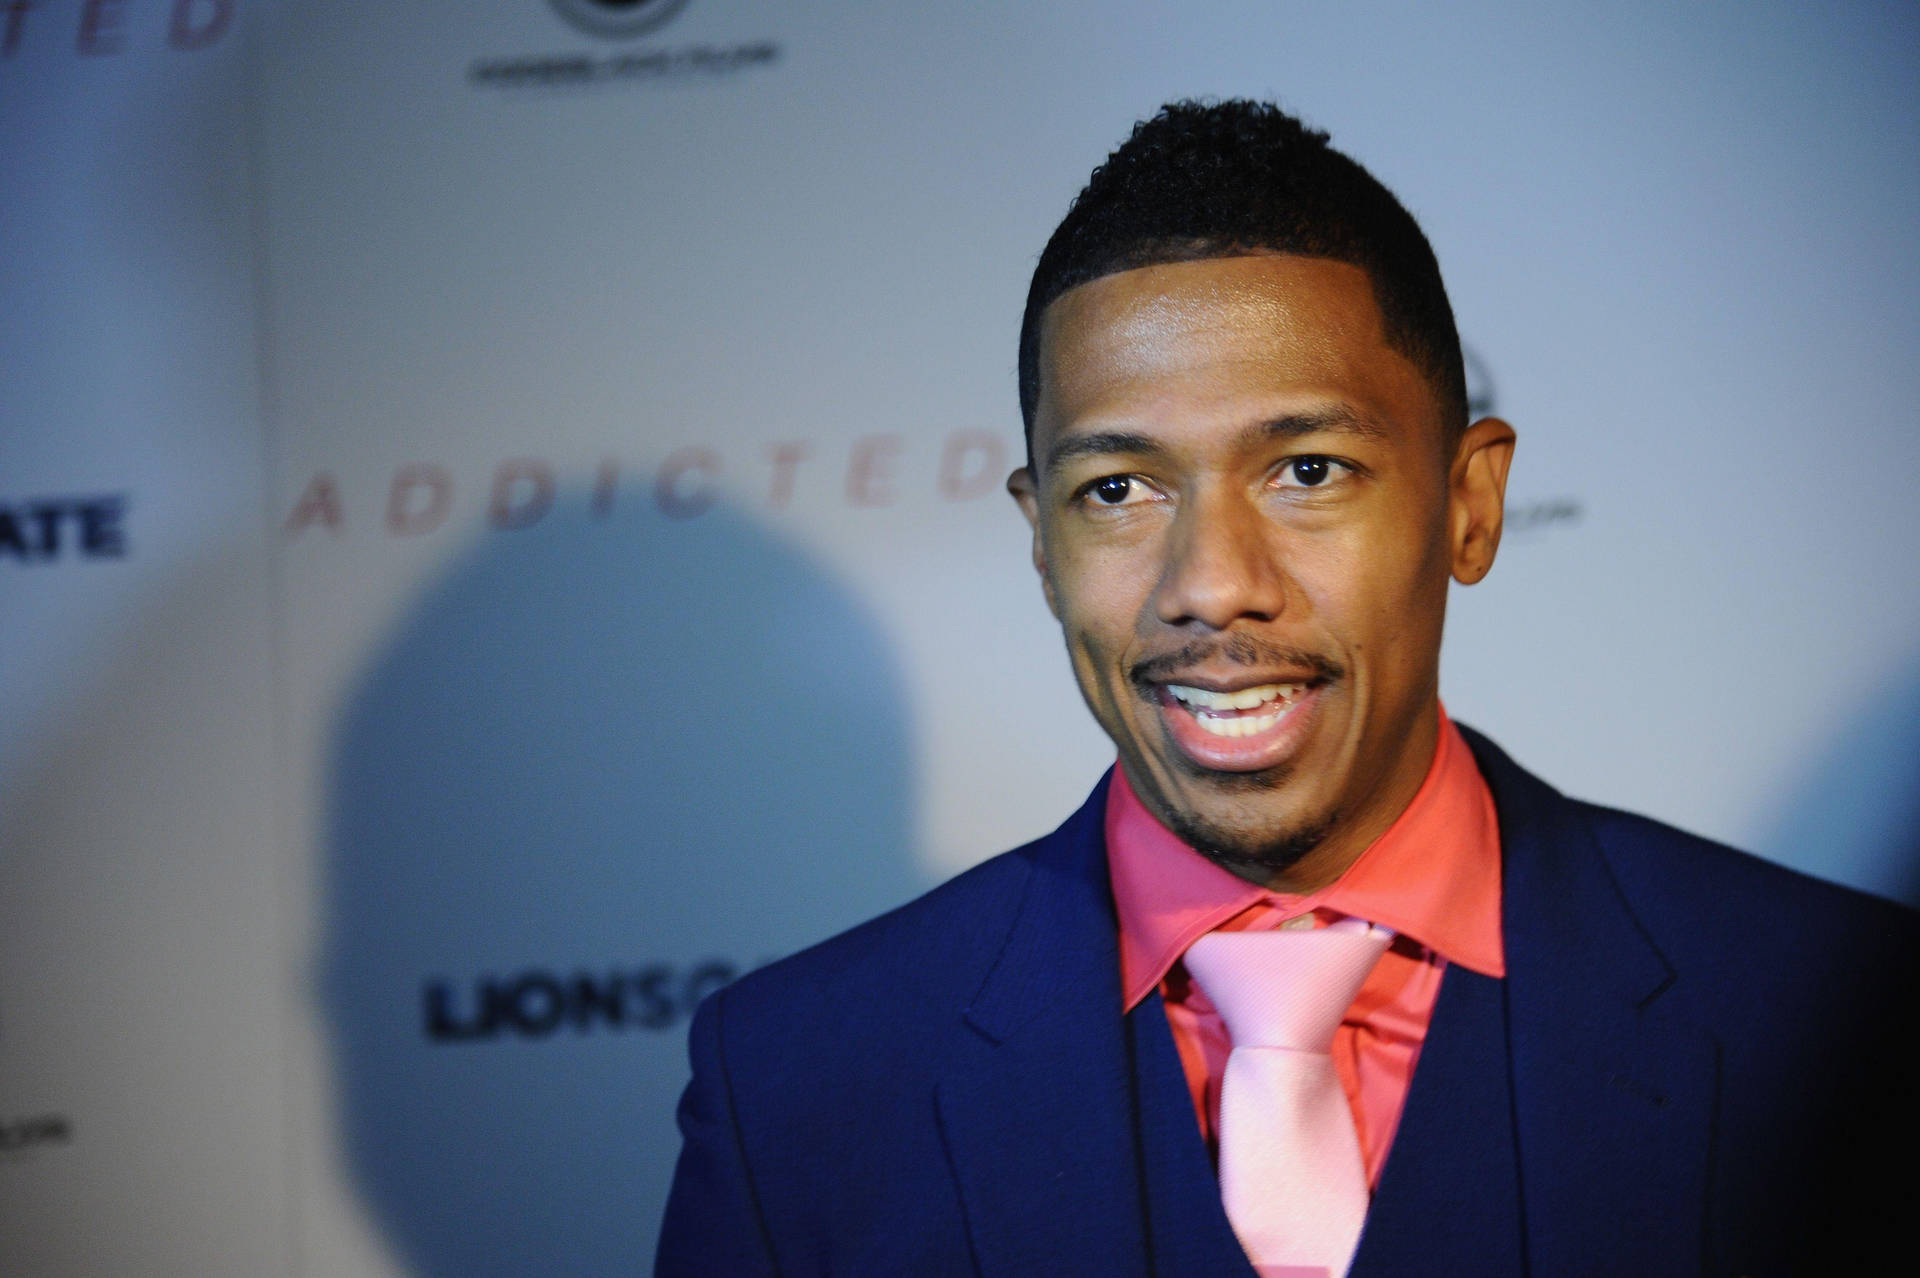 Nick Cannon Talking On Red Carpet Background